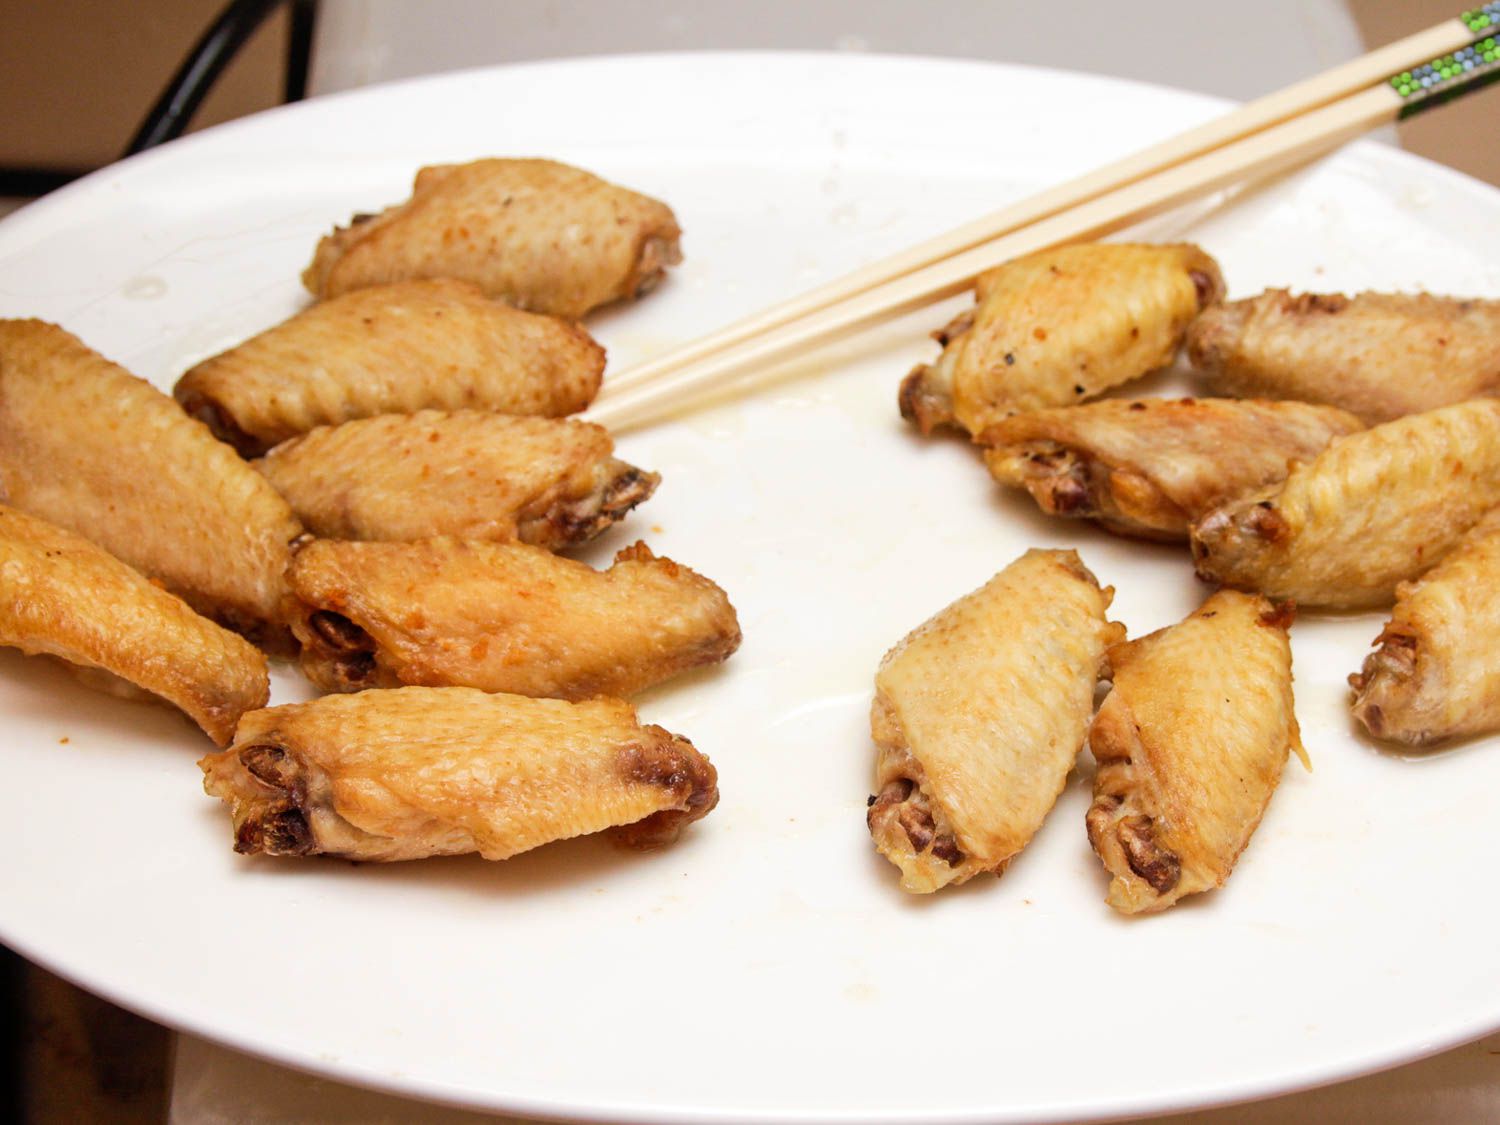 Comparing chicken wing flats after first fry at different temperatures